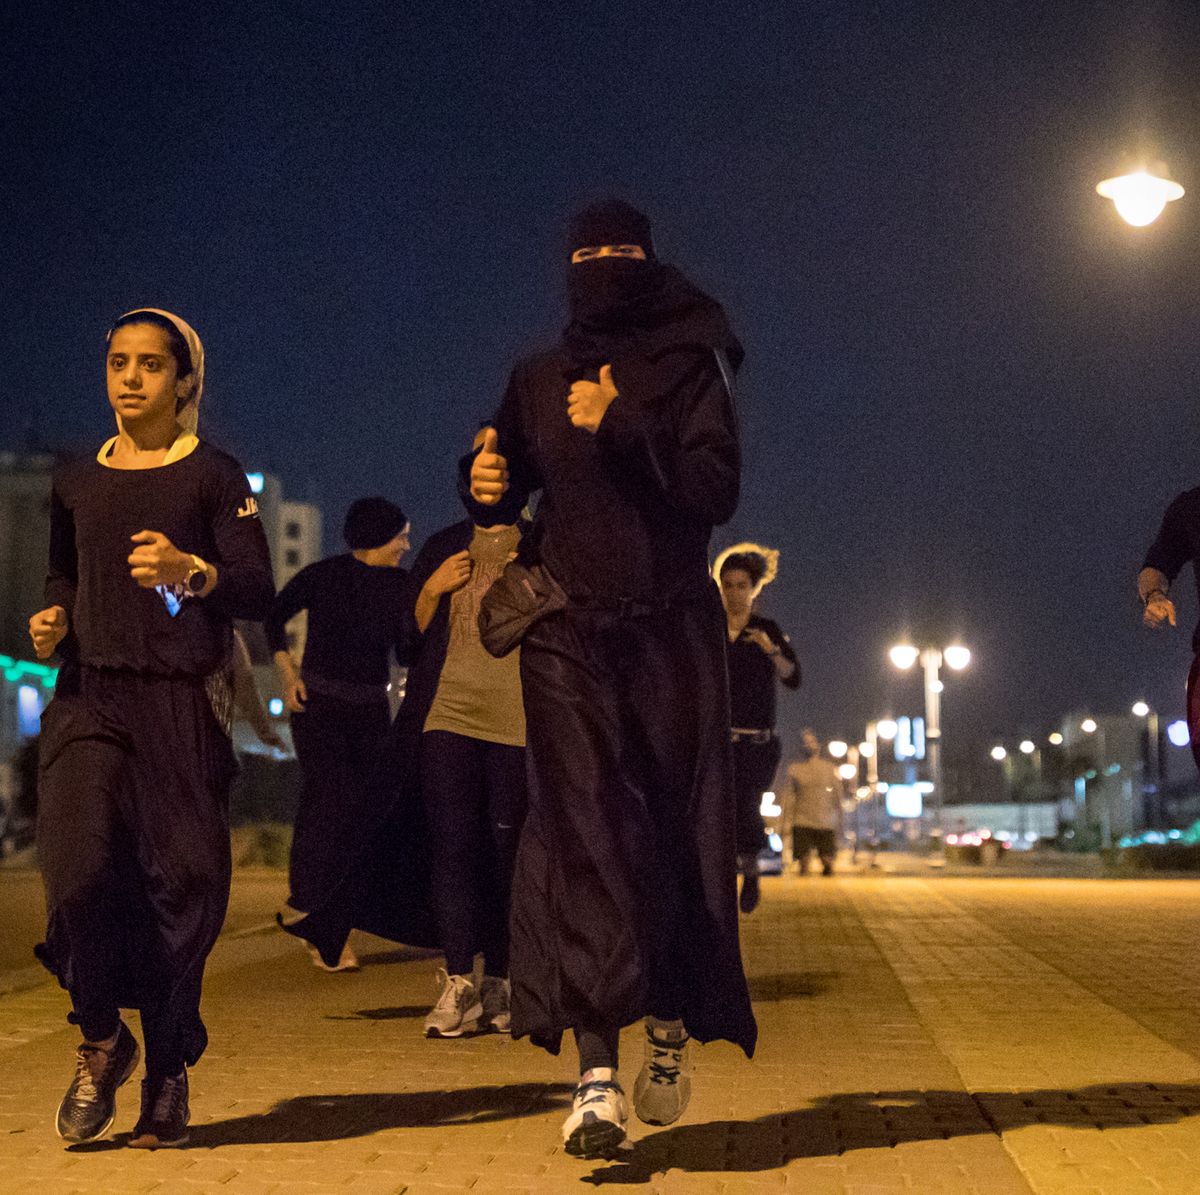 Women in Saudi Arabia Are Runningâ€”and They're Not Going to Stop